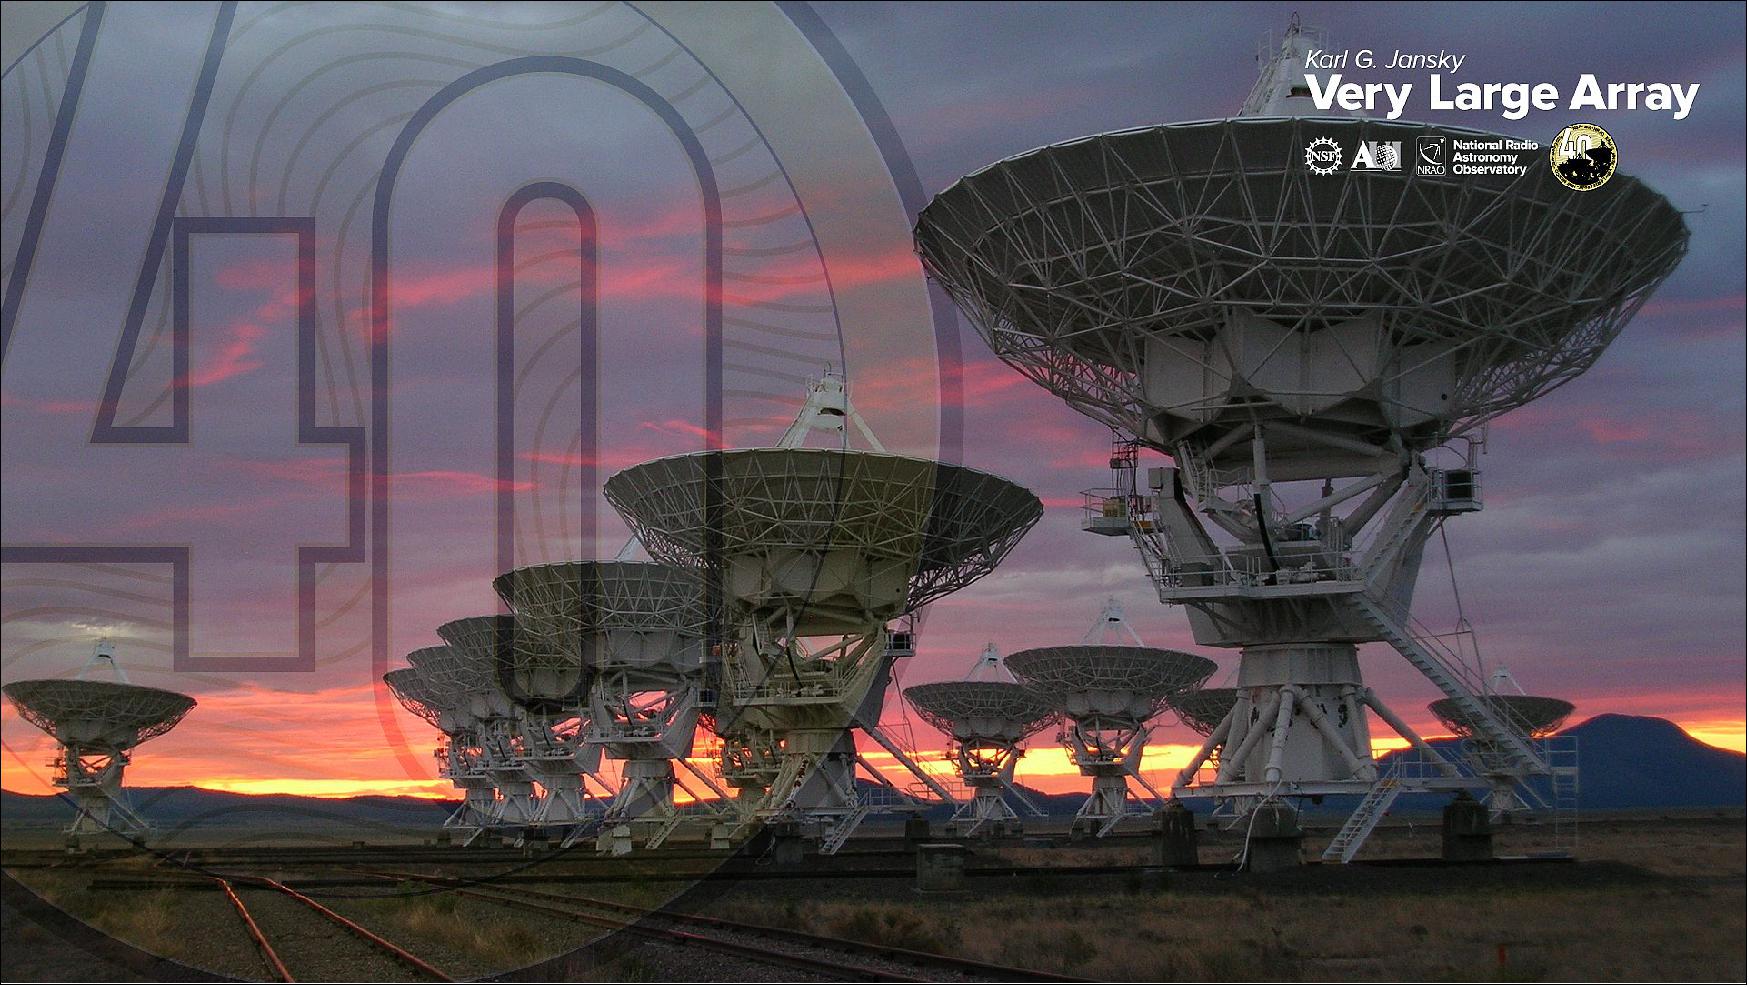 Figure 43: NRAO hosted the day-long virtual event to celebrate the VLA’s 40th anniversary. The success of the VLA is a tribute to the dedicated efforts of hundreds of staff members with an extraordinary range of skills who have designed, built, operated, maintained, and upgraded this incredibly complex system over its entire lifetime (image credit: NRAO/AUI/NSF)